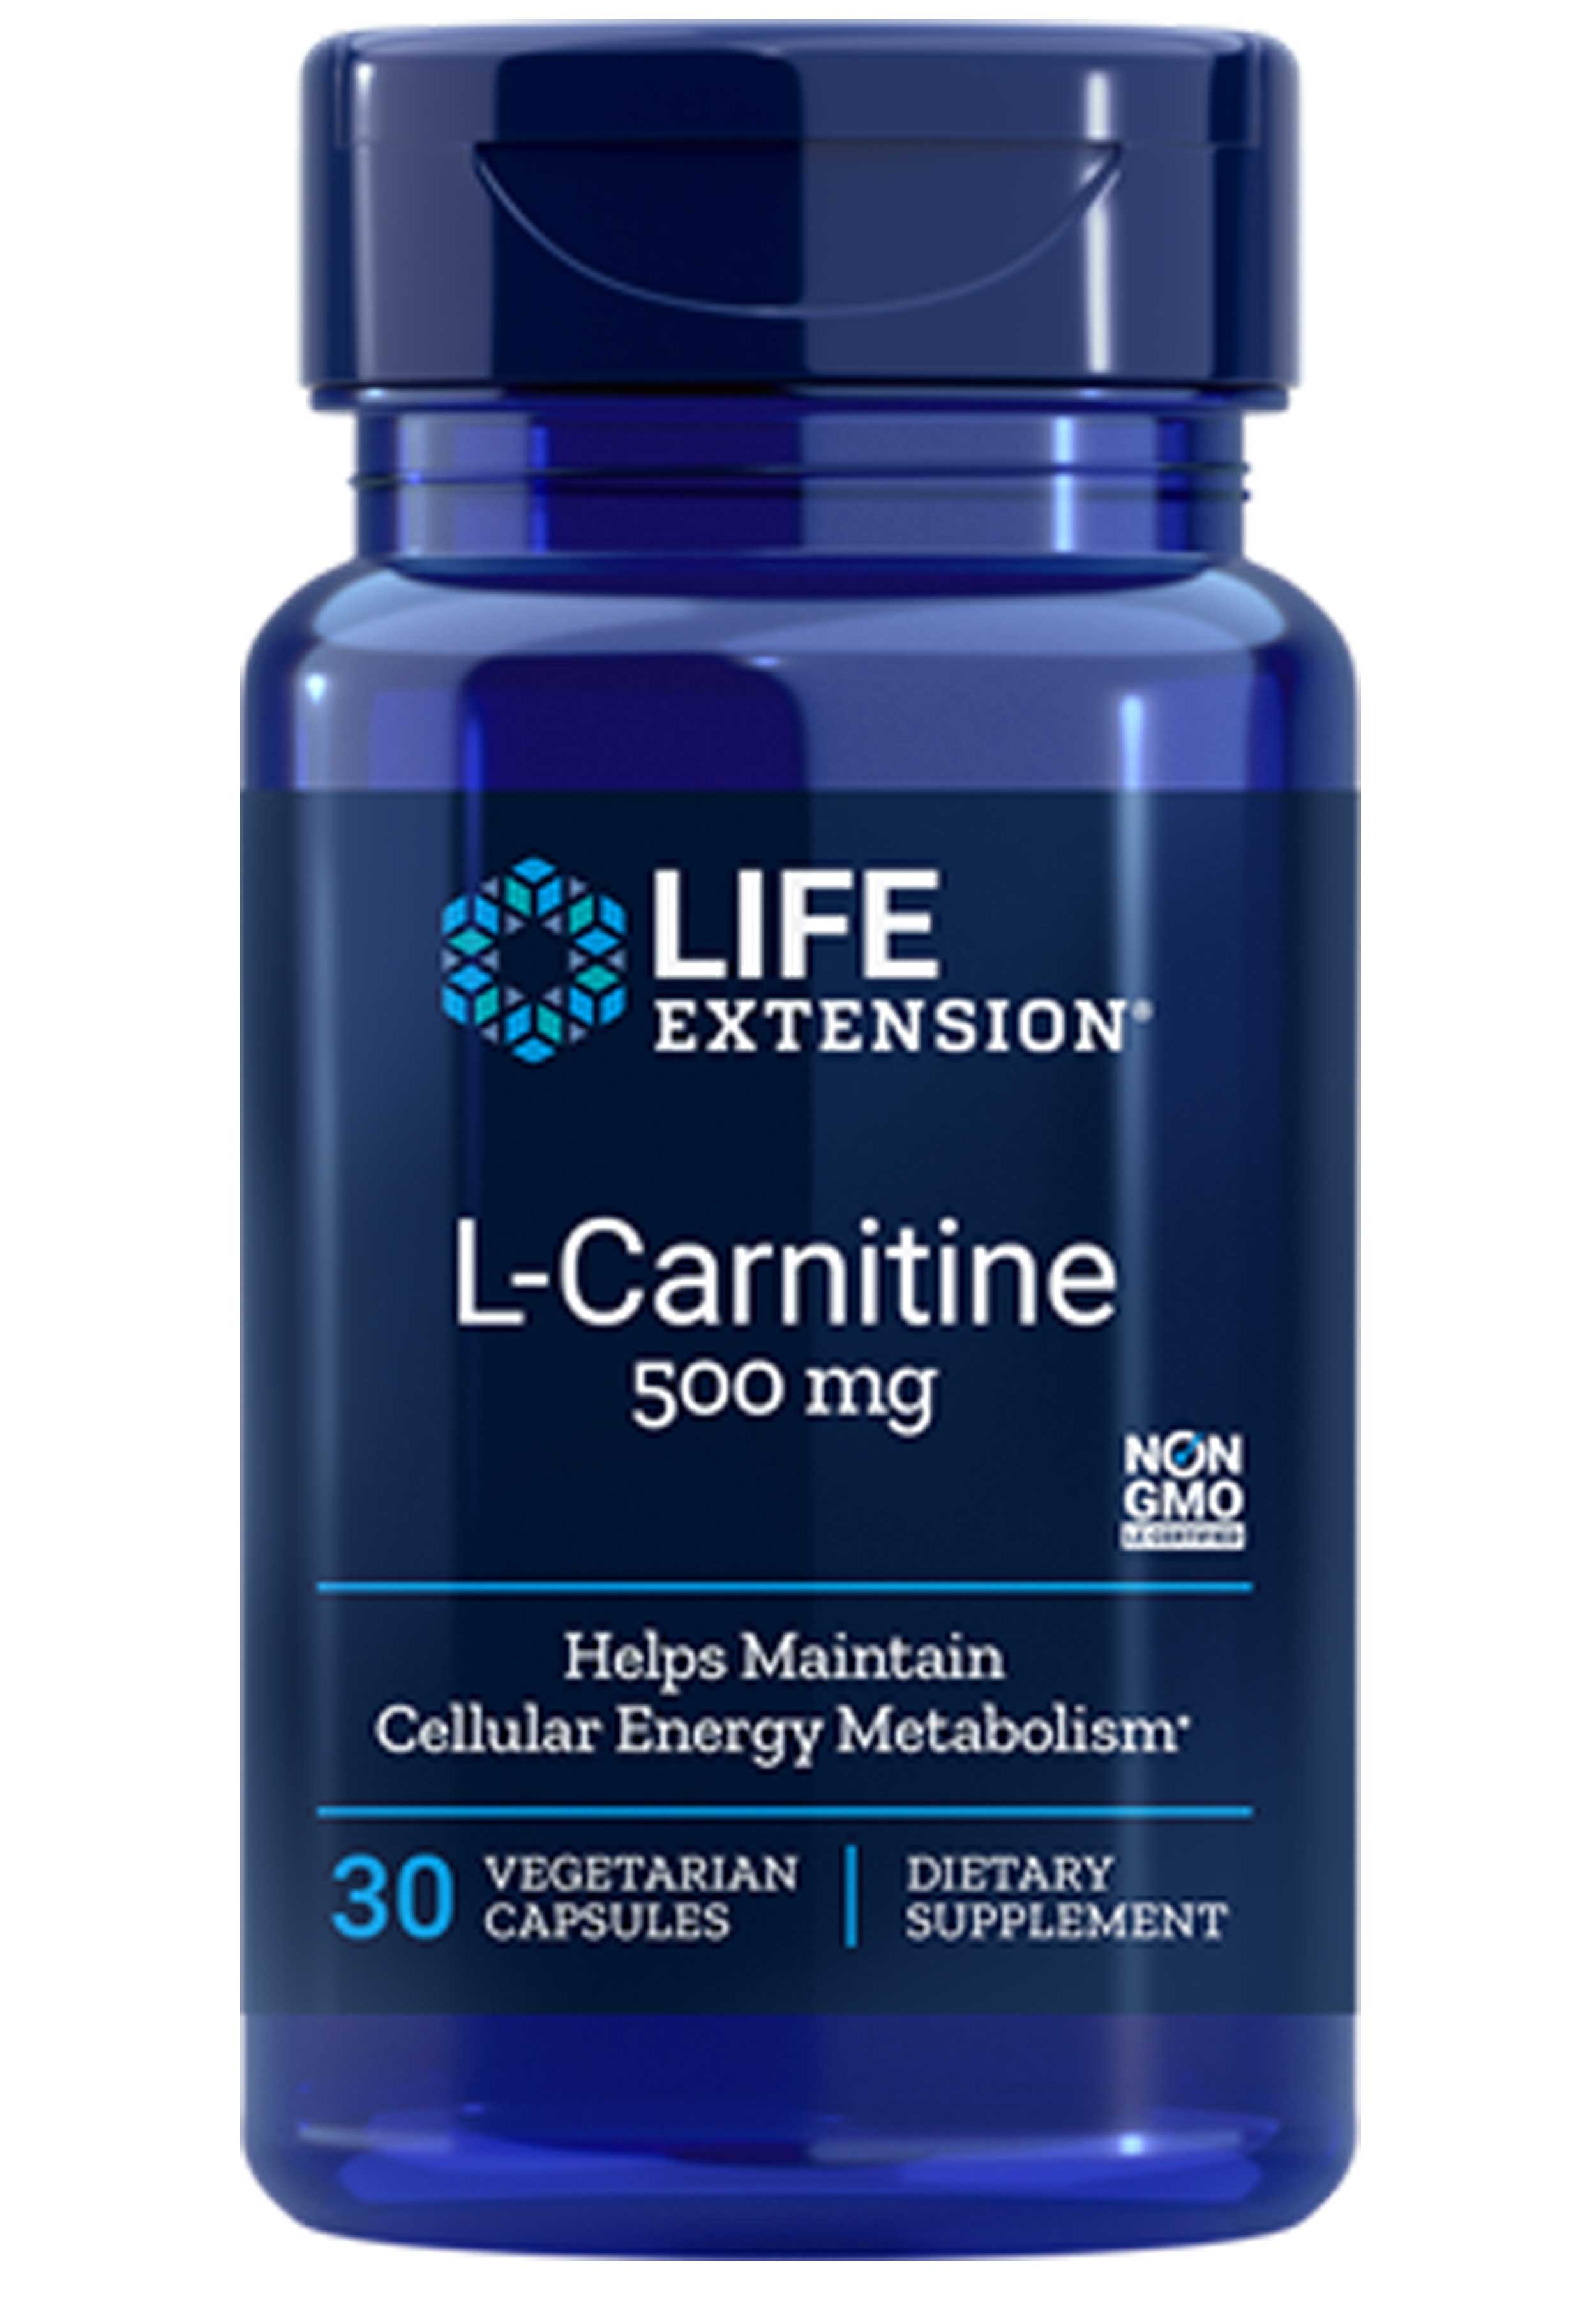 Life Extension L-Carnitine